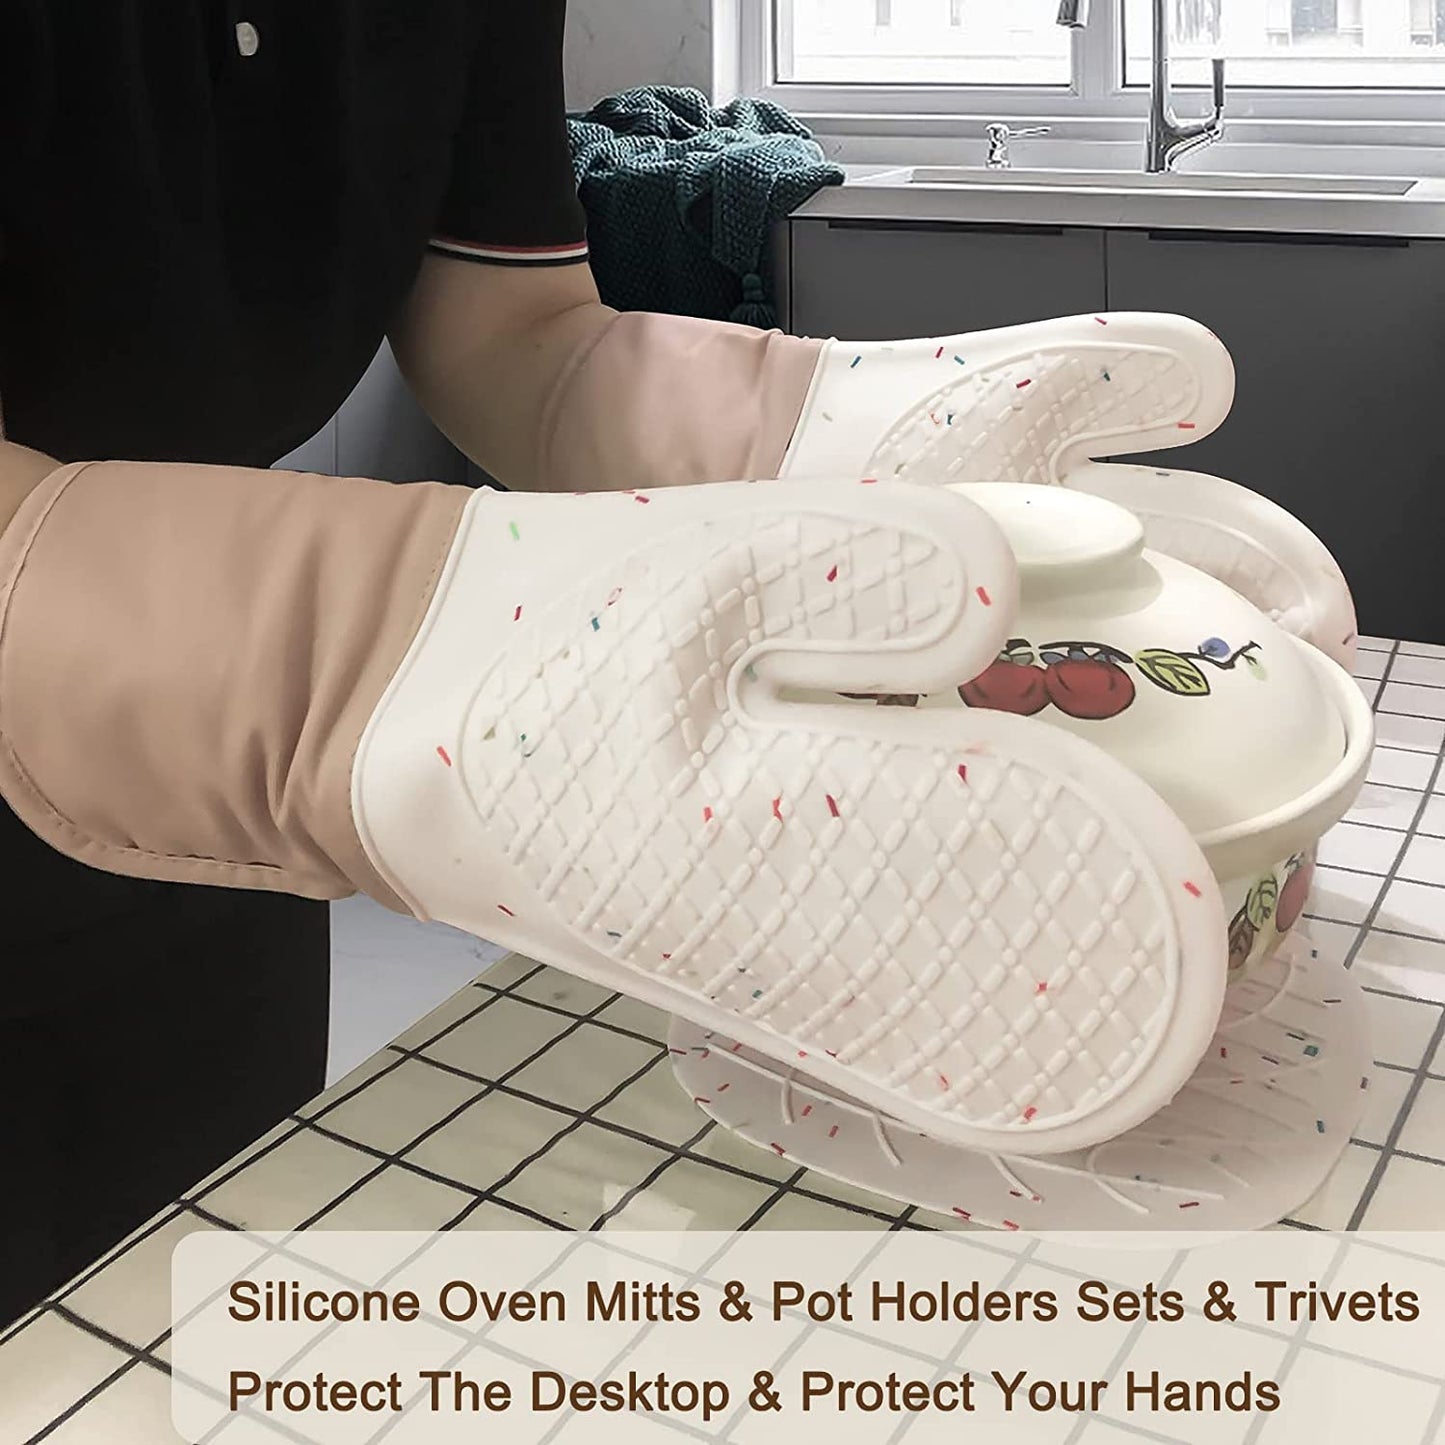 MYSWEETY Extra Long Oven Mitts and Pot Holders Sets, Heat Resistant Silicone Oven Mittens with Hot Pads, Double Layer High Temperature Resistant Hot Pads and Oven Mitts Sets for Cooking, Grilling-Beige 3 PCS